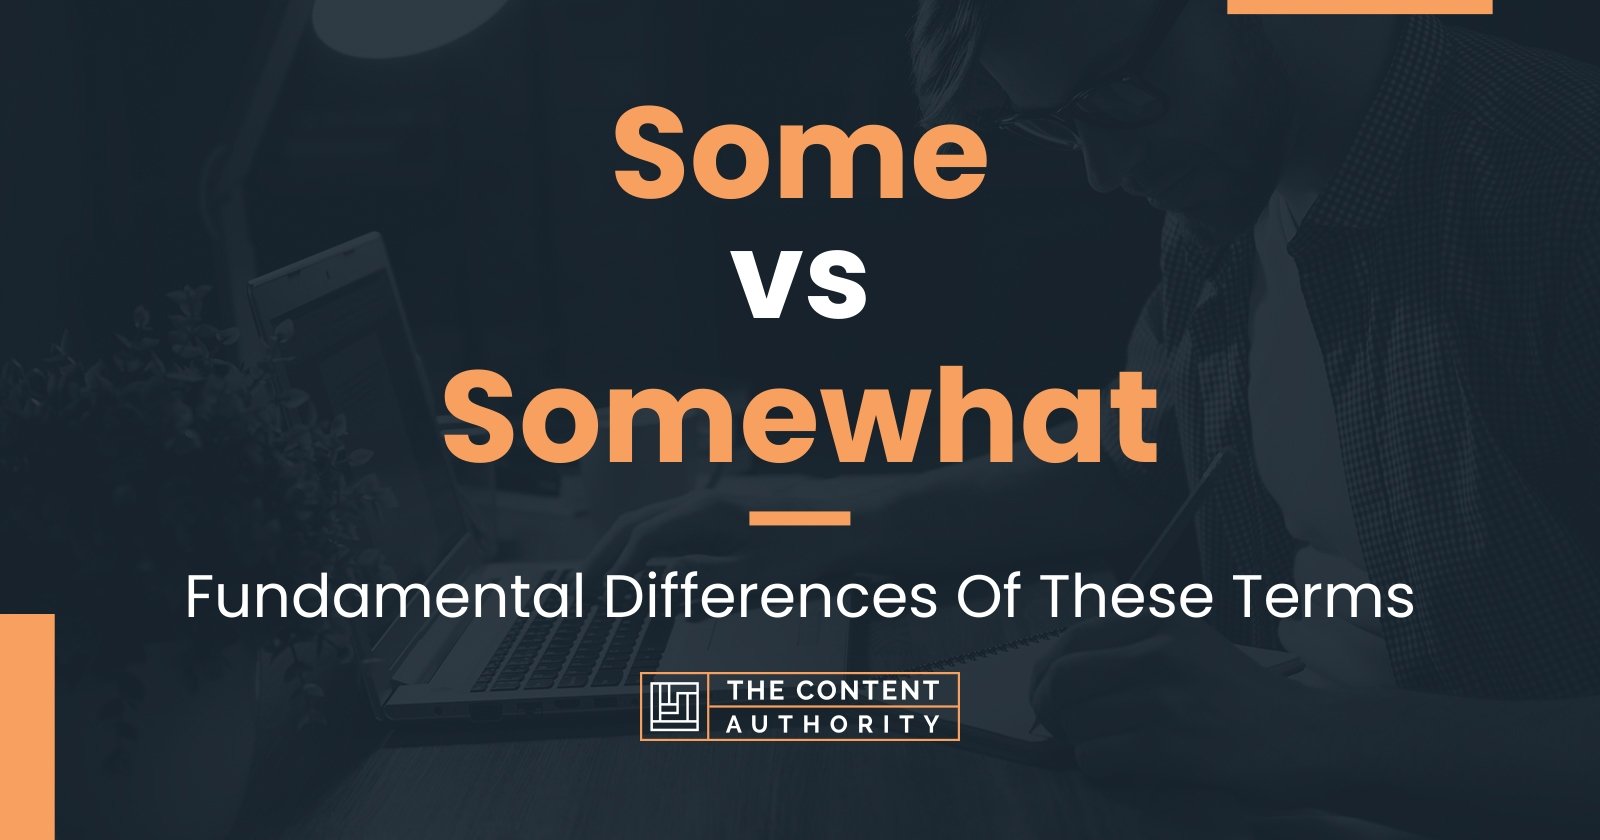 Some vs Somewhat: Fundamental Differences Of These Terms